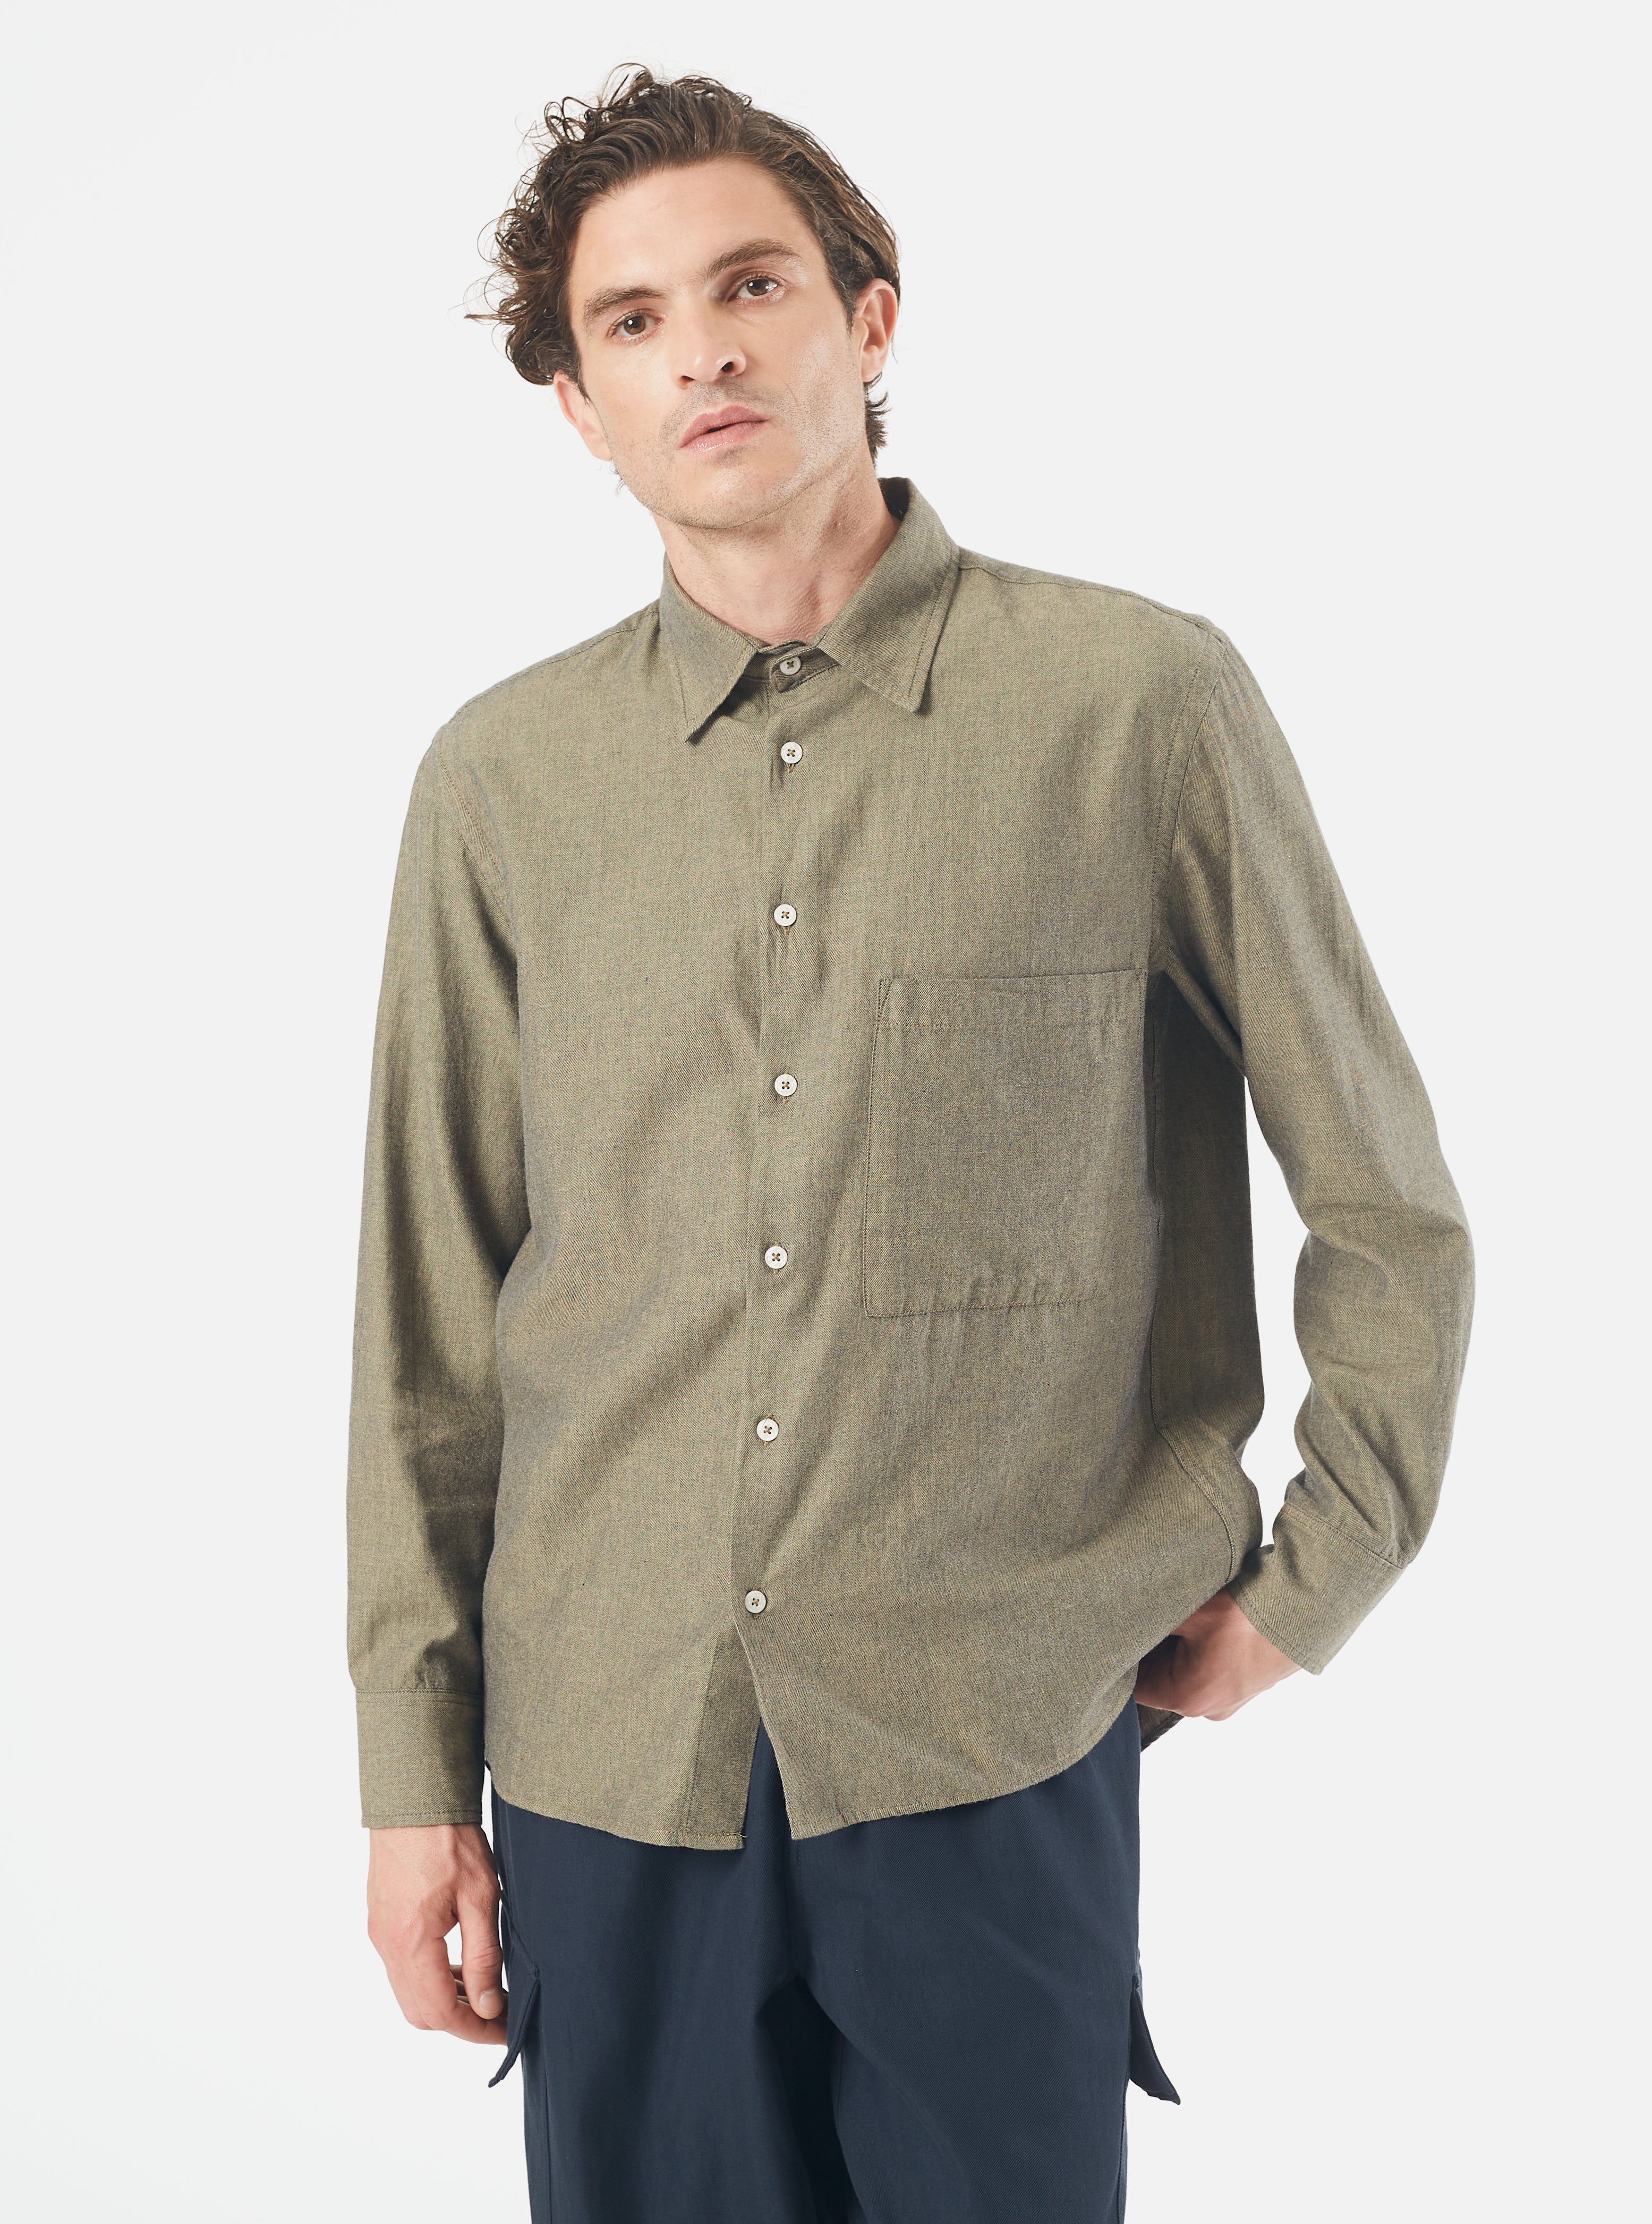 Universal Works Square Pocket Shirt in Olive IT Brushed Twill